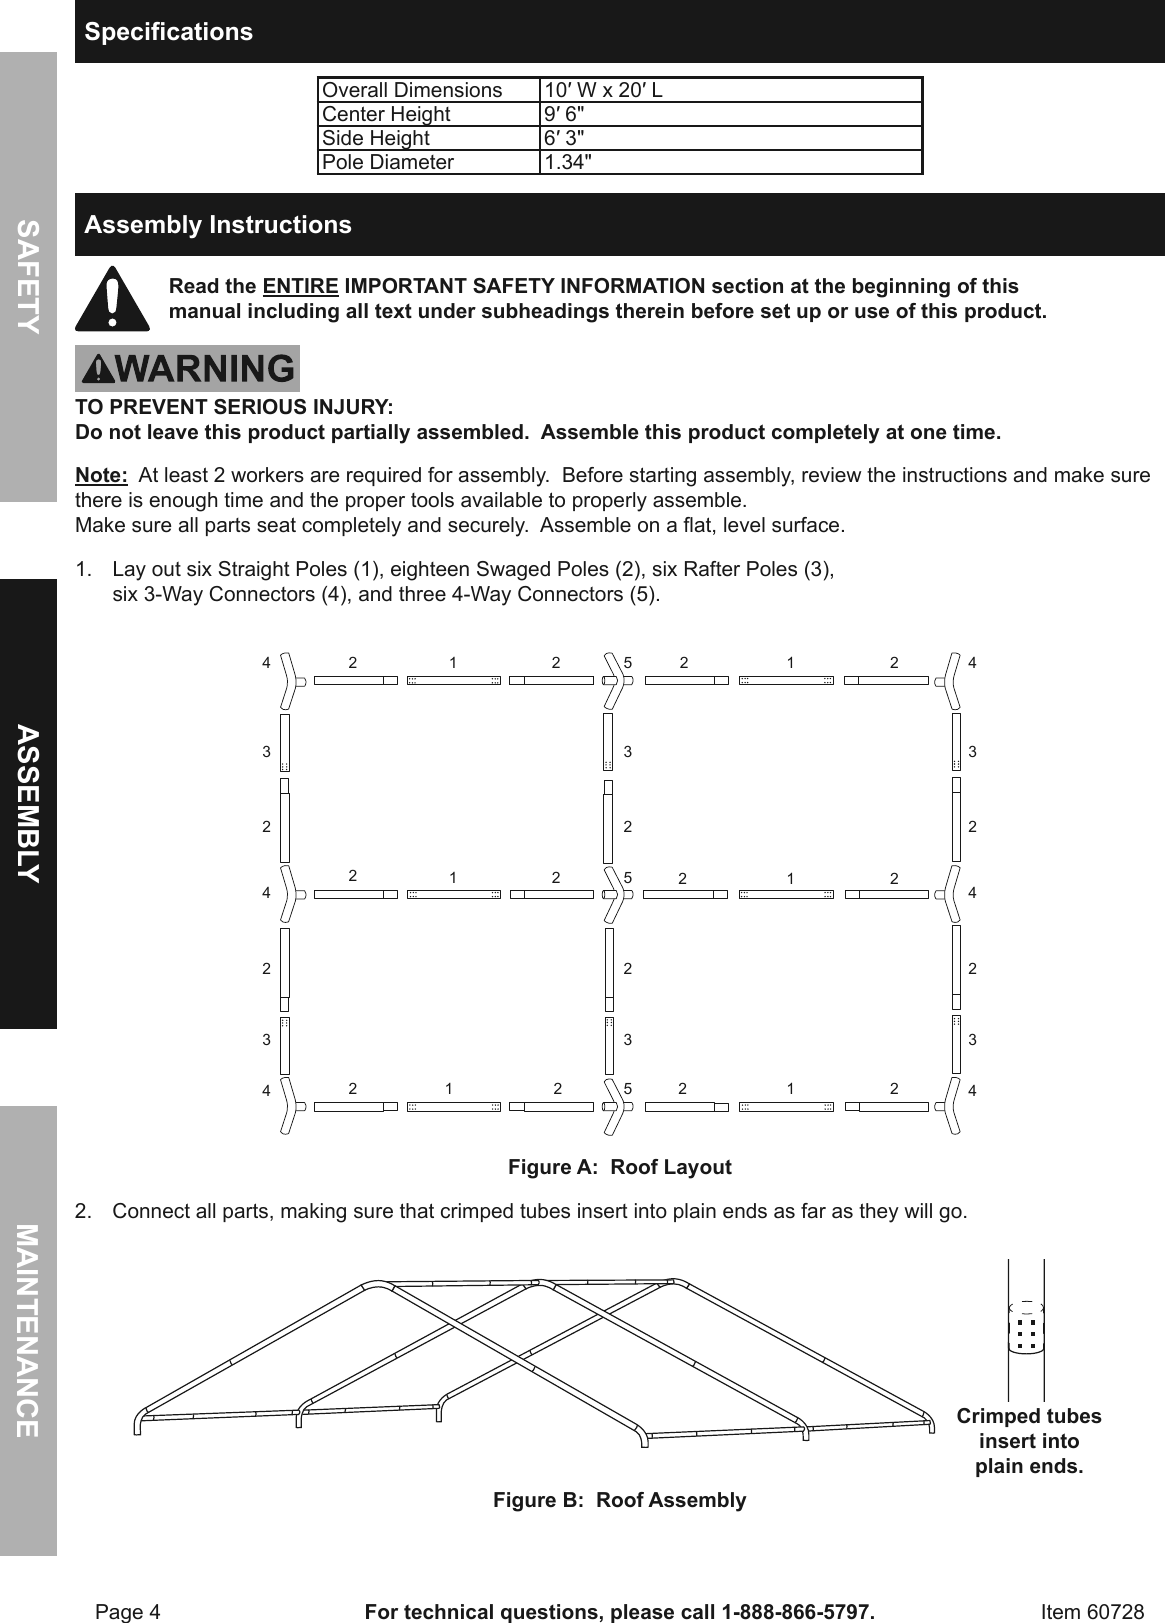 Page 4 of 8 - Harbor-Freight Harbor-Freight-10-Ft-X-20-Ft-Portable-Car-Canopy-Product-Manual-  Harbor-freight-10-ft-x-20-ft-portable-car-canopy-product-manual